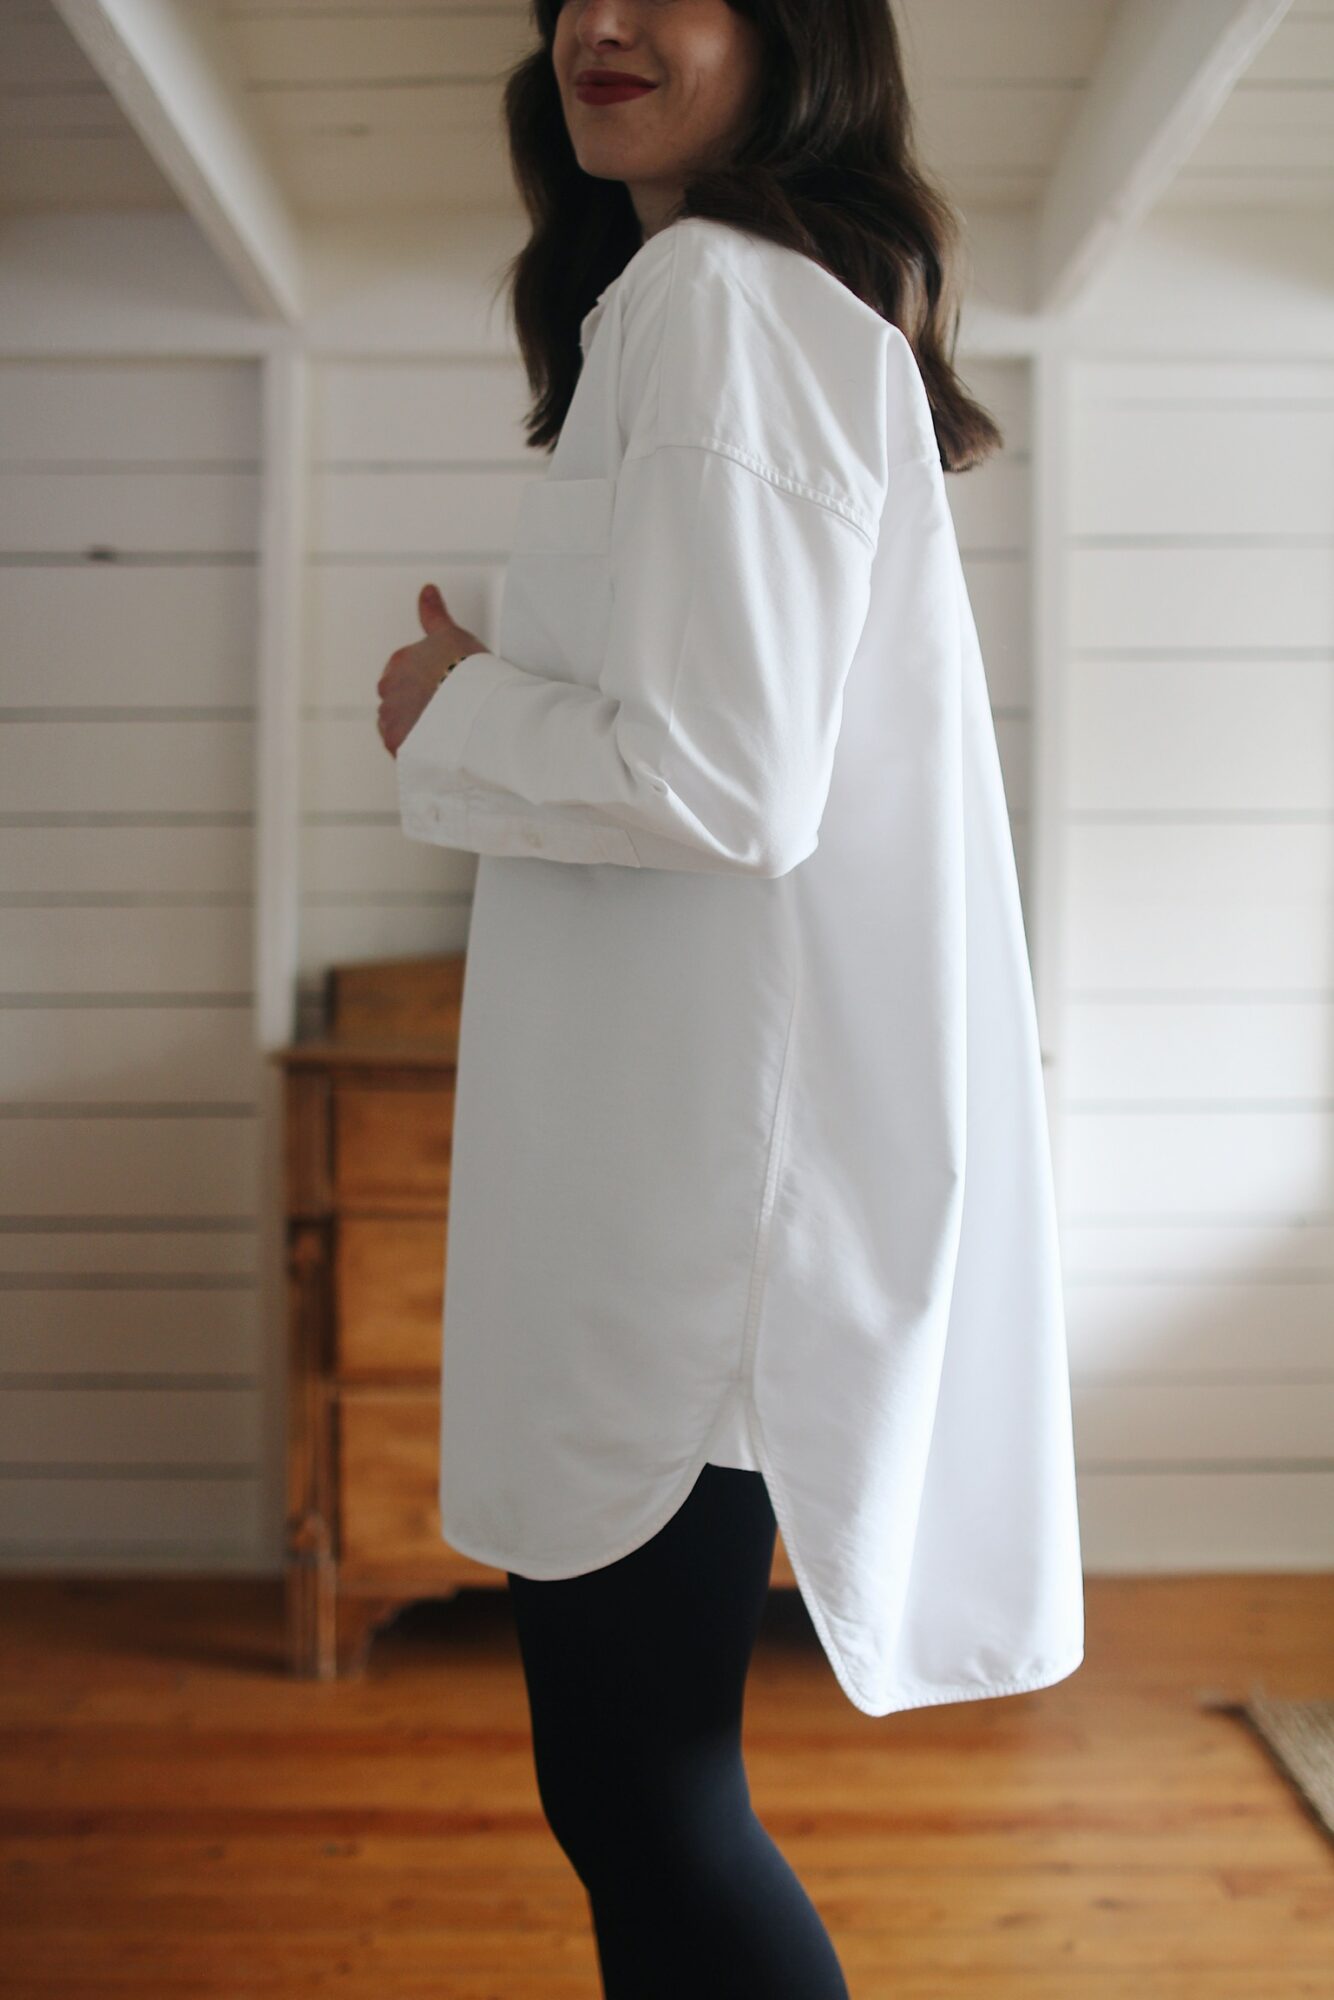 OVERSIZE WHITE SHIRT, LEGGINGS, CAMEL COAT AND CHUNKY BOOTS - Style Bee